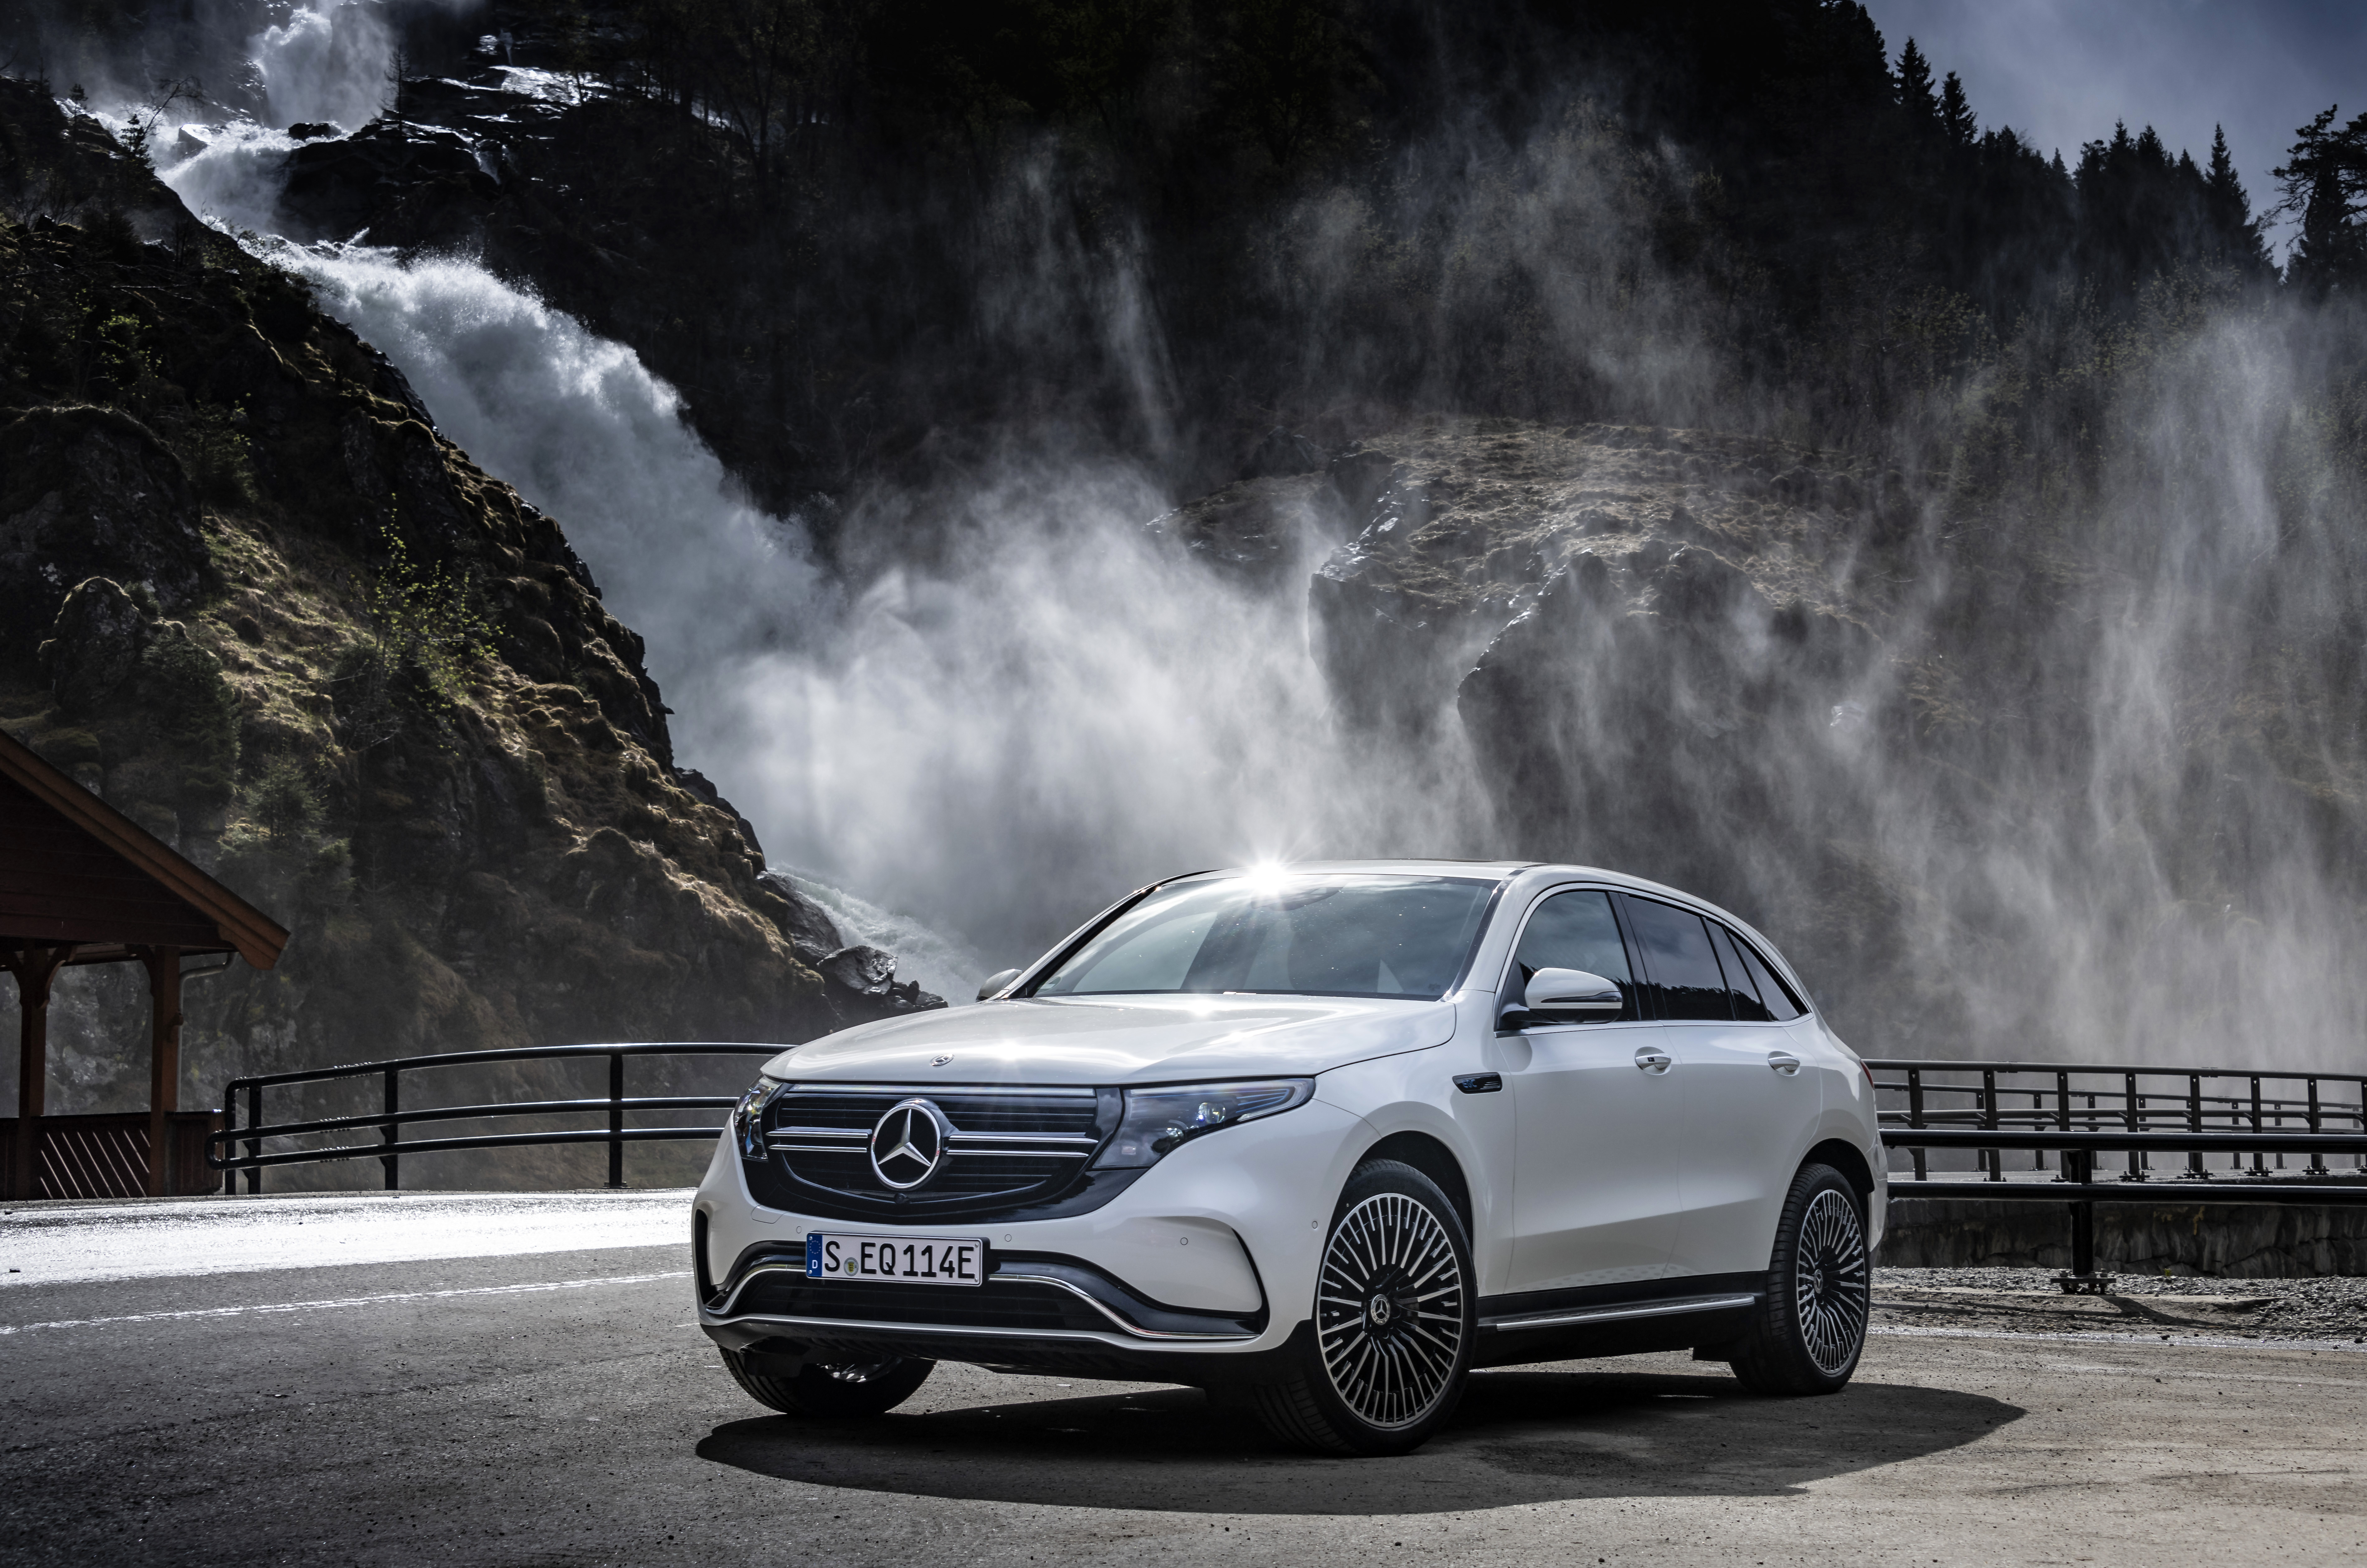 Mercedes Prices Its All Electric Eqc Crossover At 67 900 Techcrunch